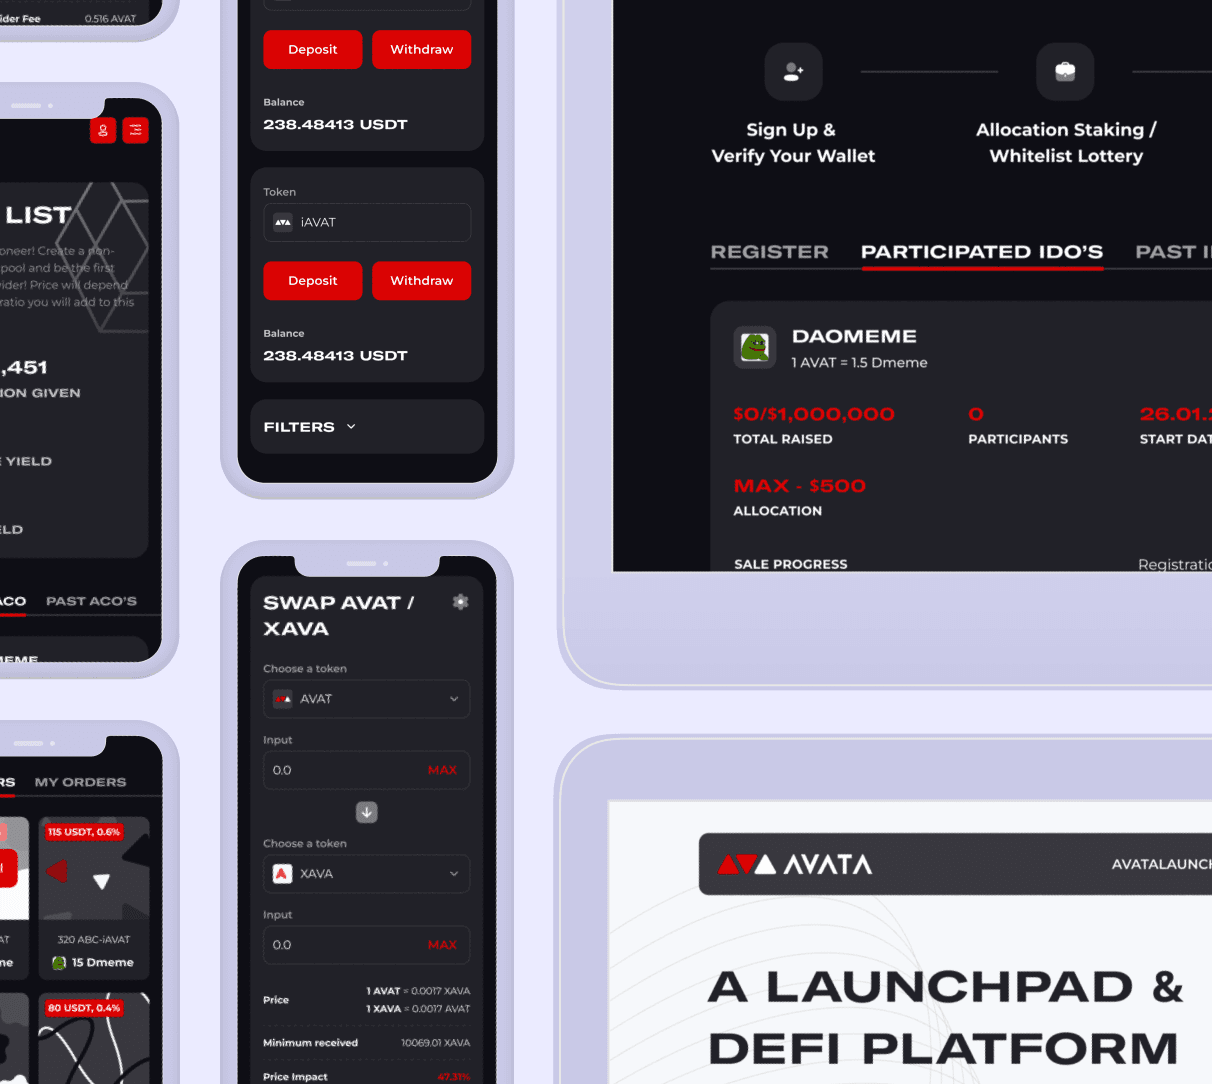 AVATA - The decentralized platform for scaling new projects and tokens on the Avalanche network.